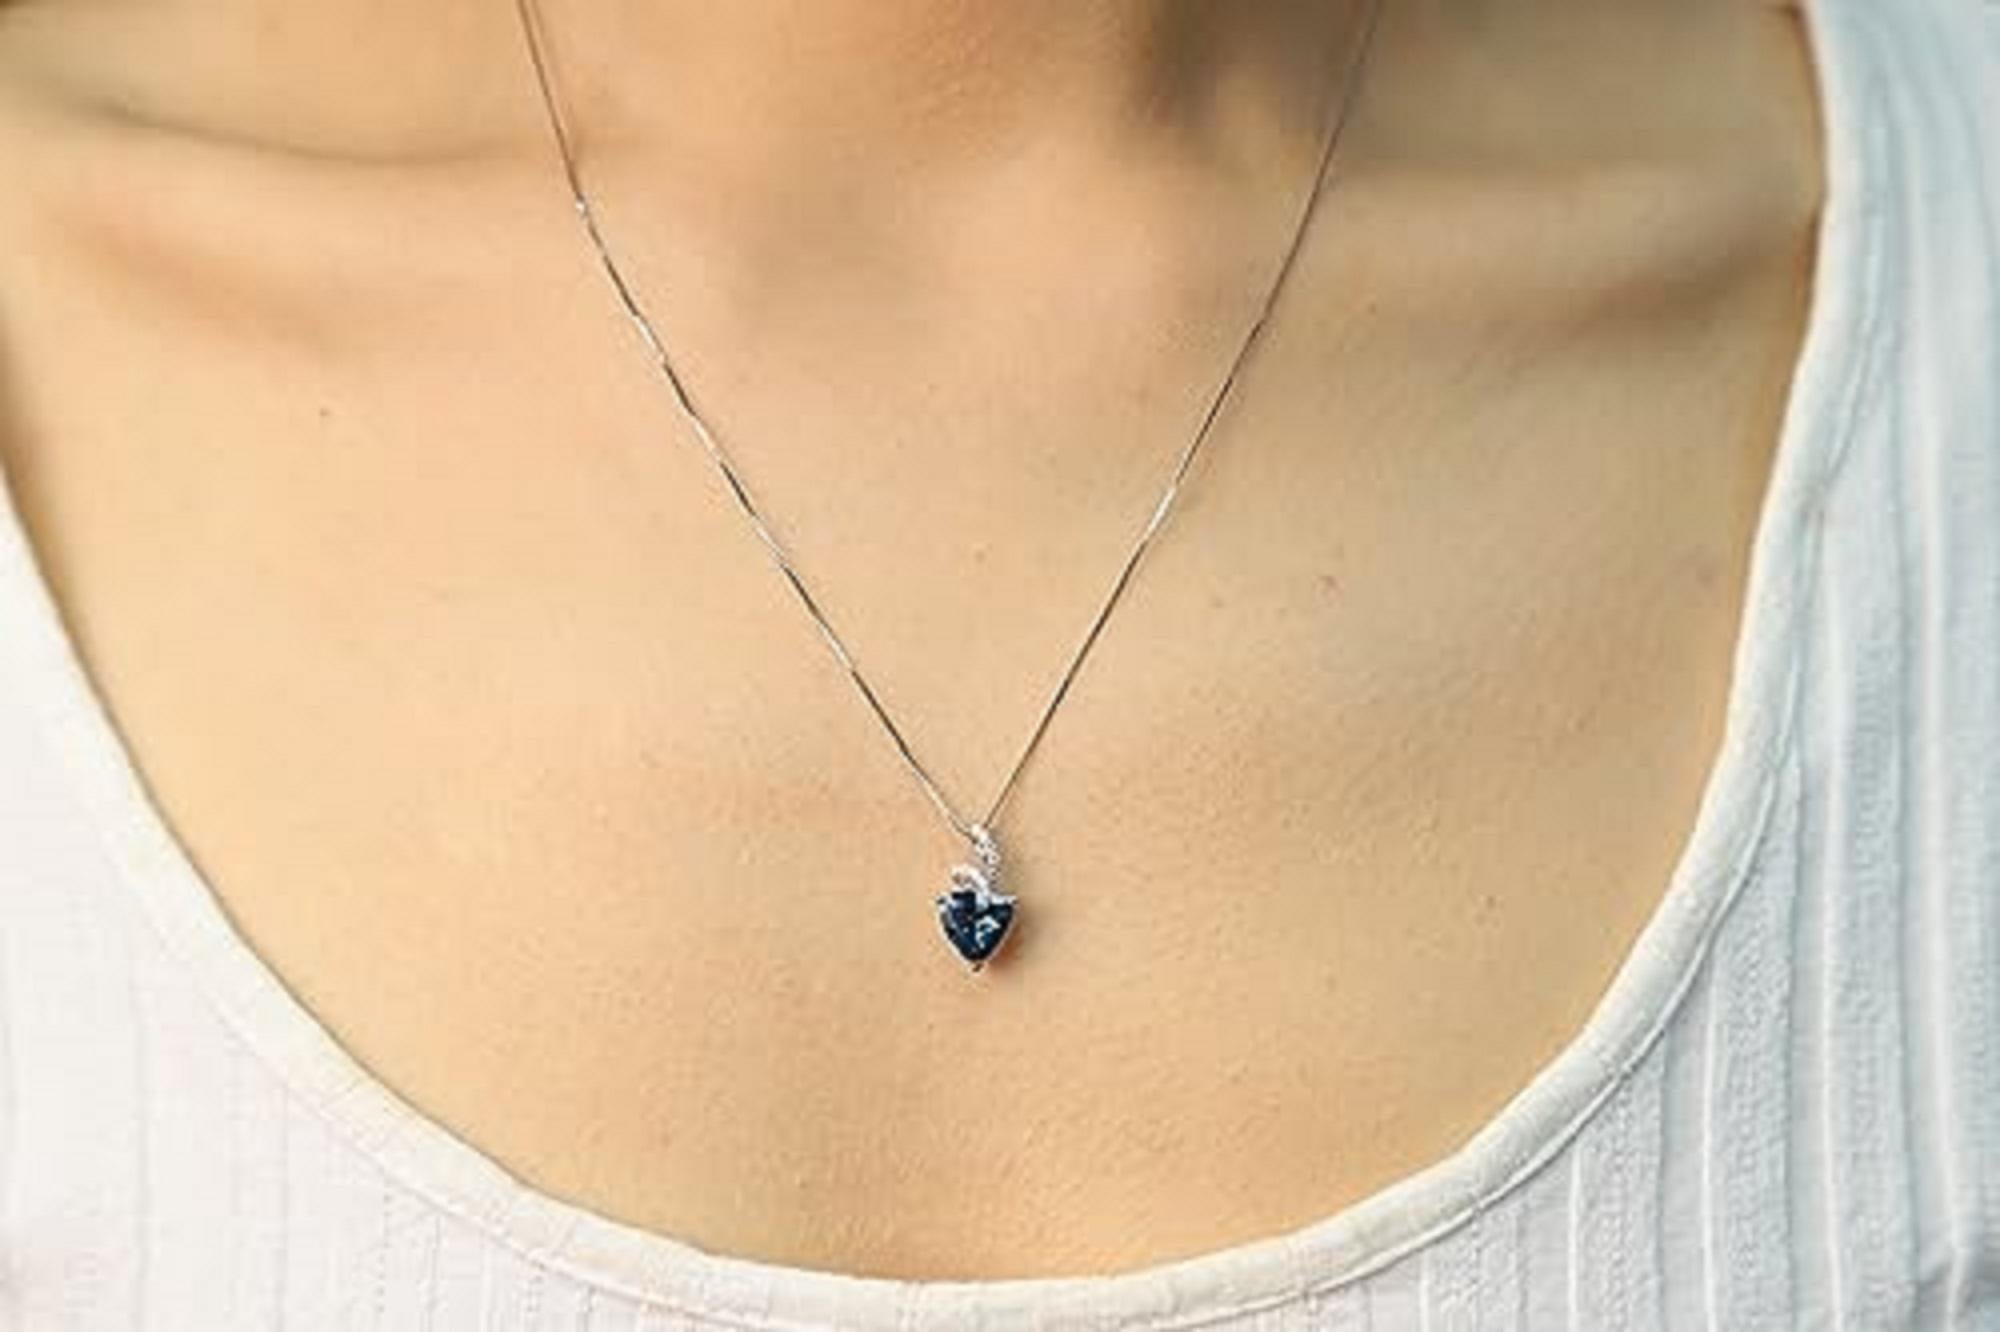 Decorate yourself in elegance with this Pendant is crafted from 14-karat White Gold by Gin & Grace Pendant. This Pendant is made up of 8mm Trillion-cut Prong setting Tanzanite (1 Pcs) 1.88 Carat and Round-Cut Prong setting White Diamond (12 Pcs)